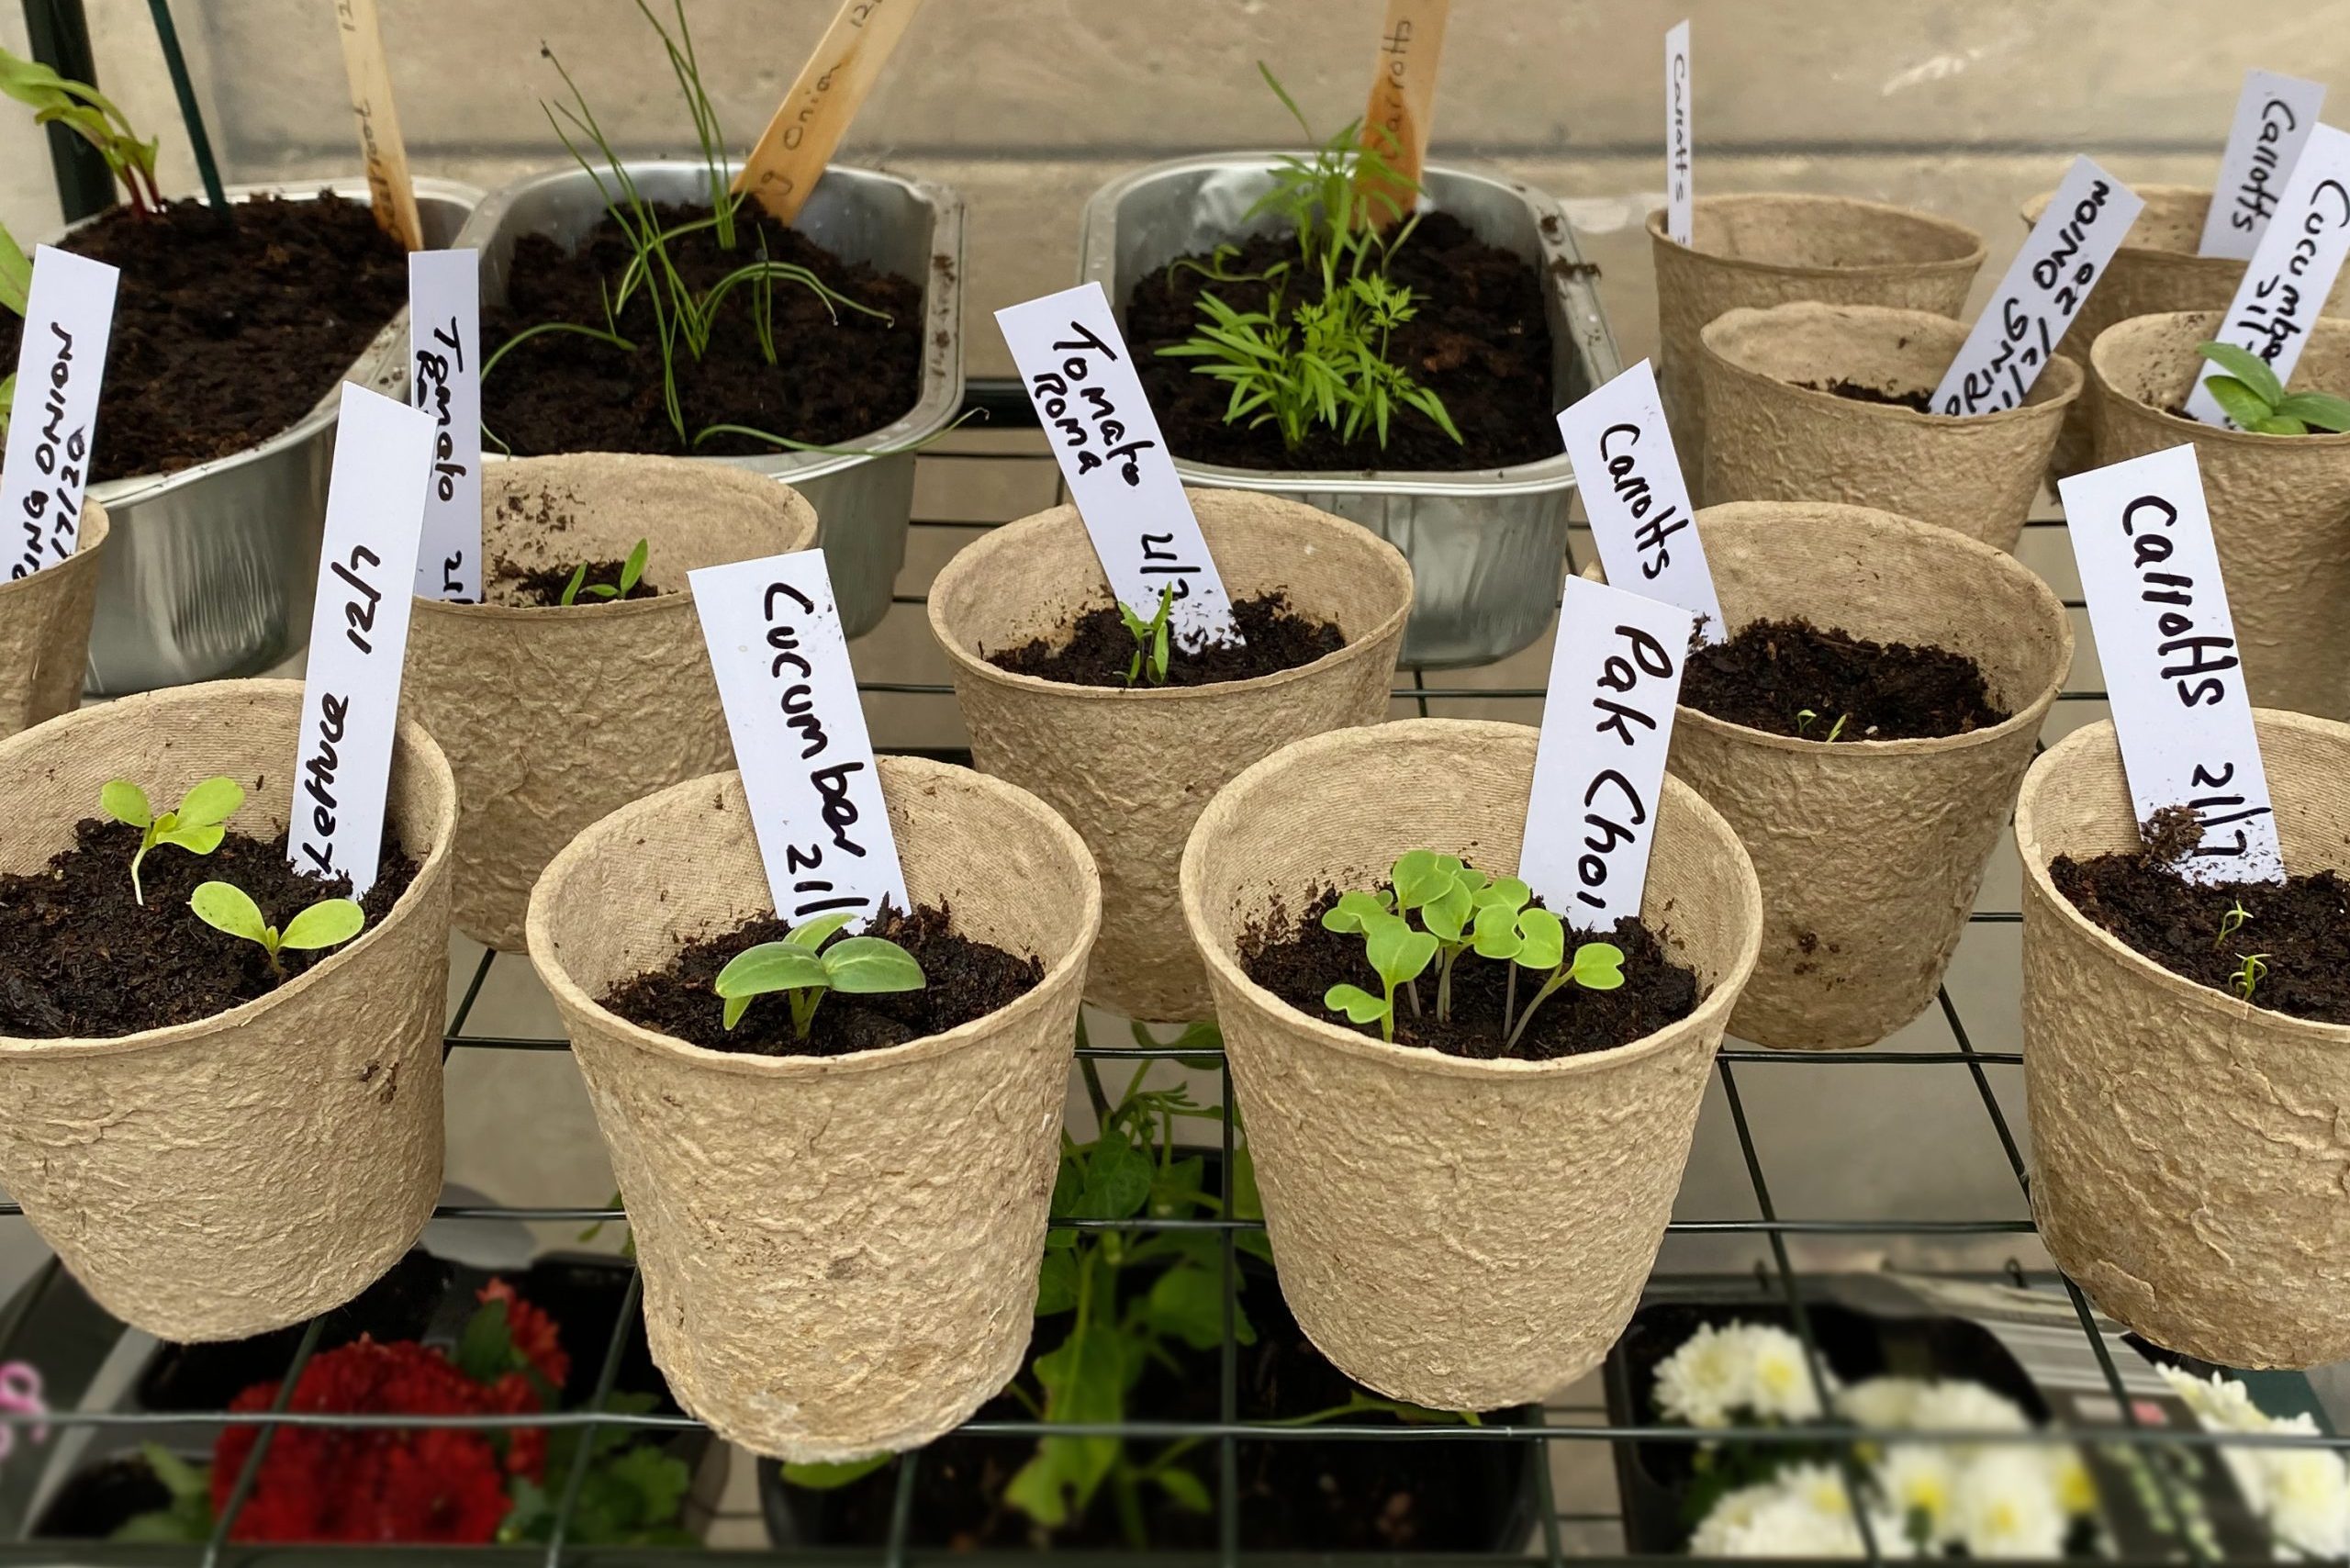 Seedlings planted in pots and labelled